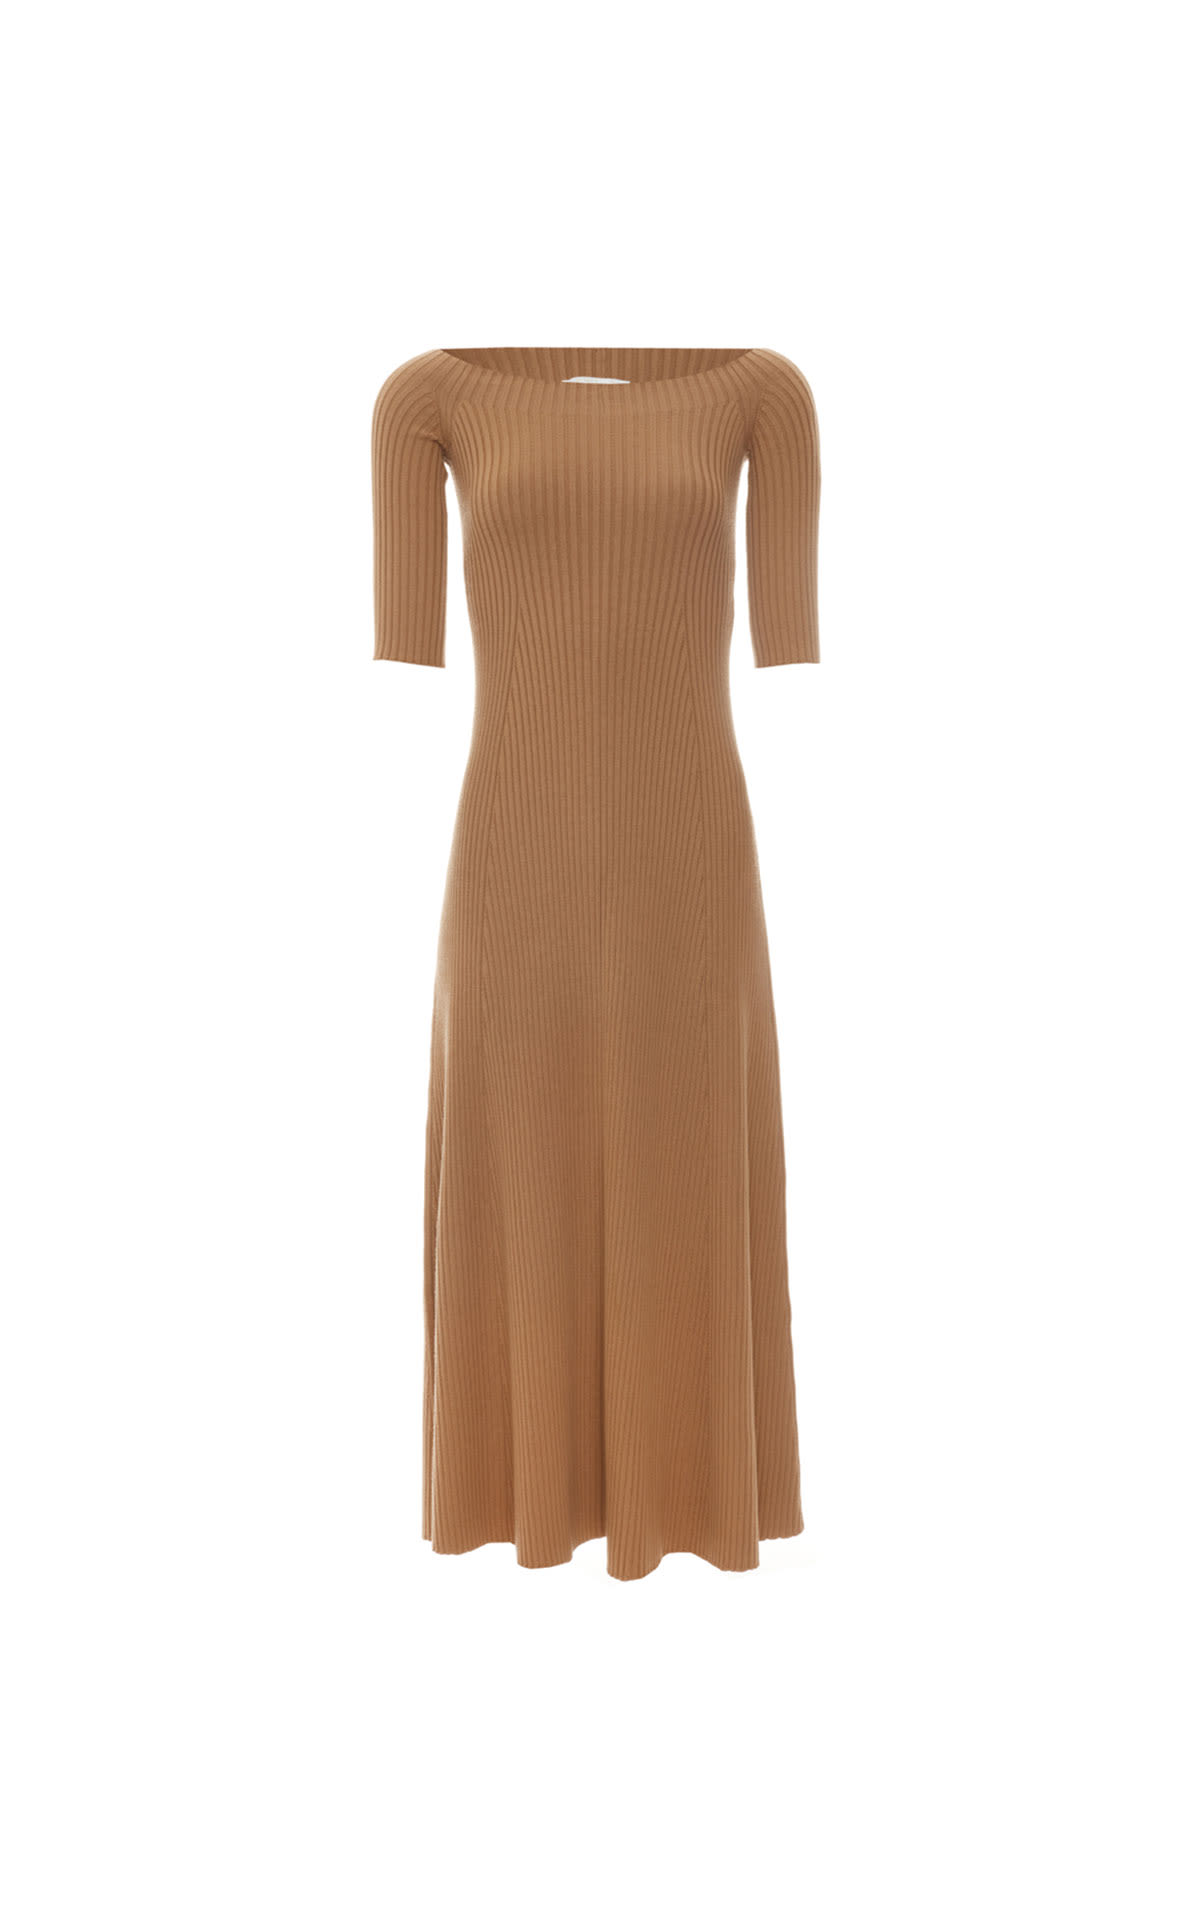 Chloe Knitted boat neck dress from Bicester Village